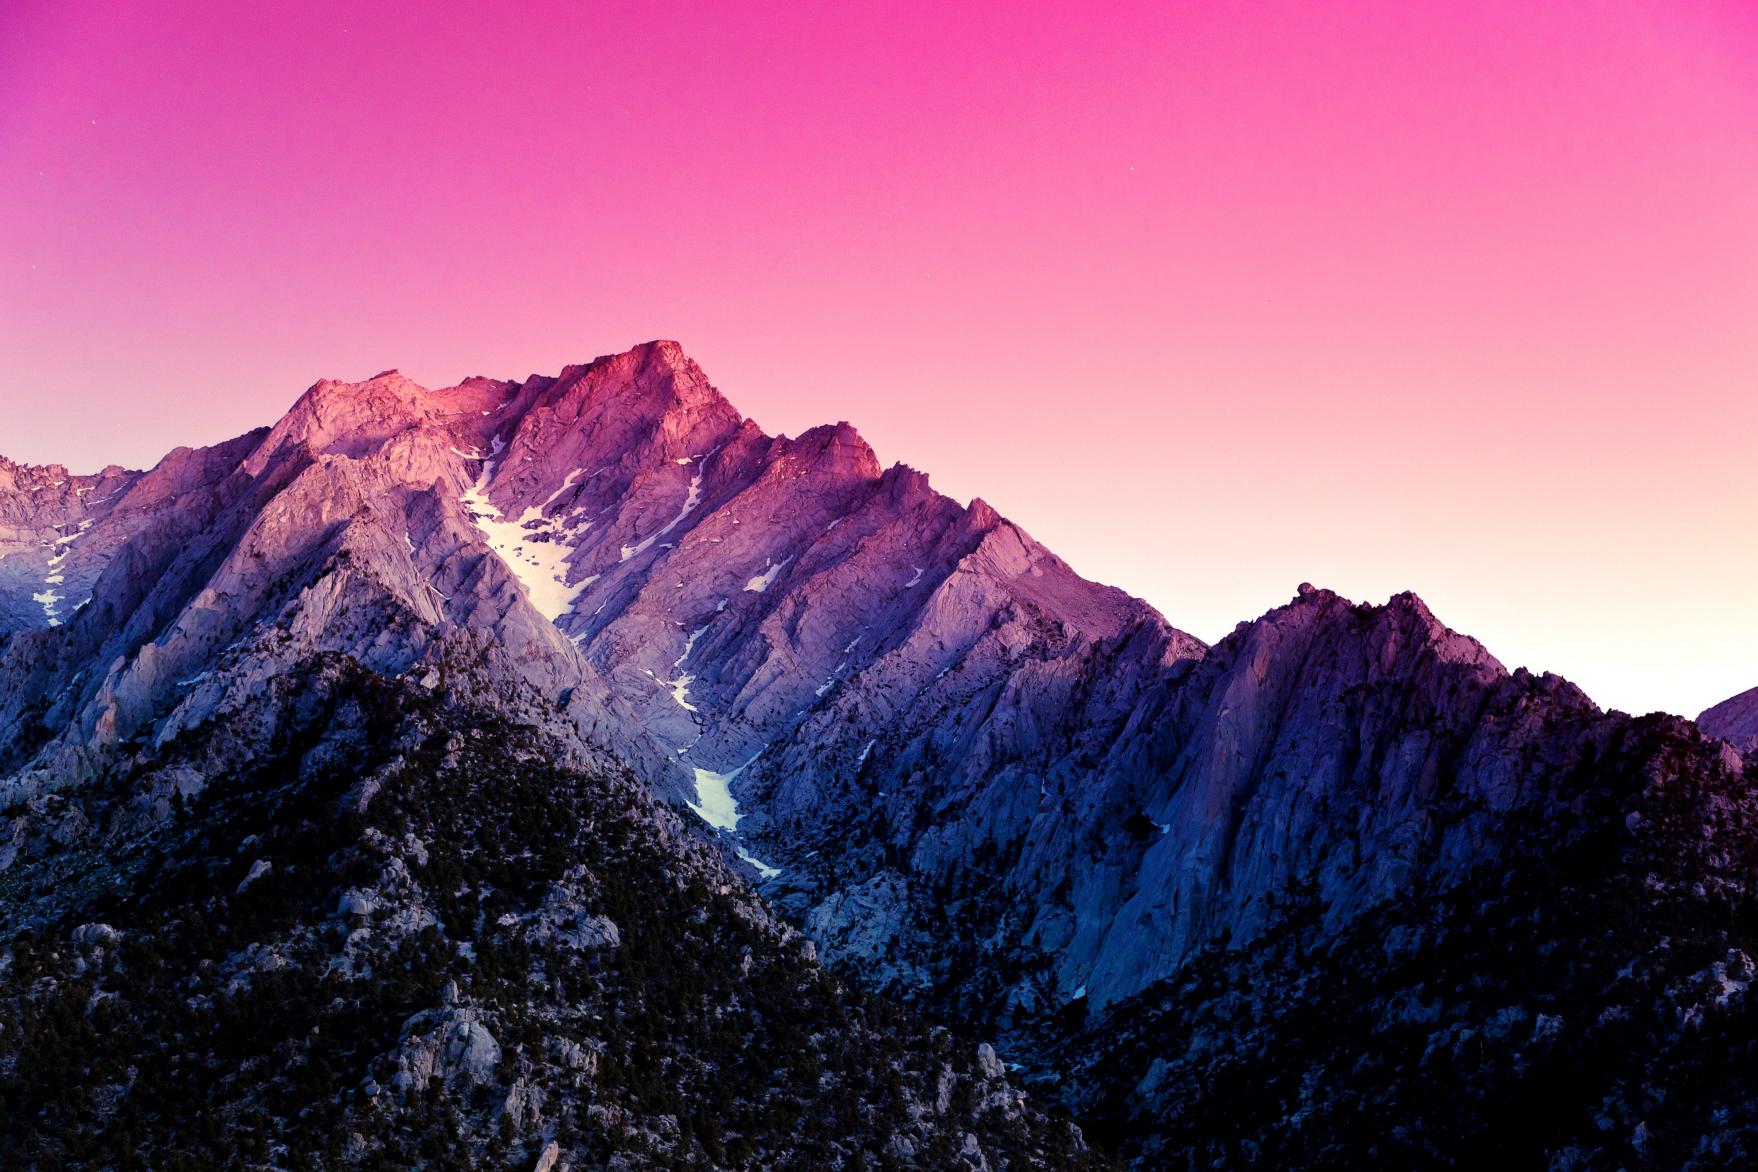 Nexus 5 wallpapers now available to download | TalkAndroid.com